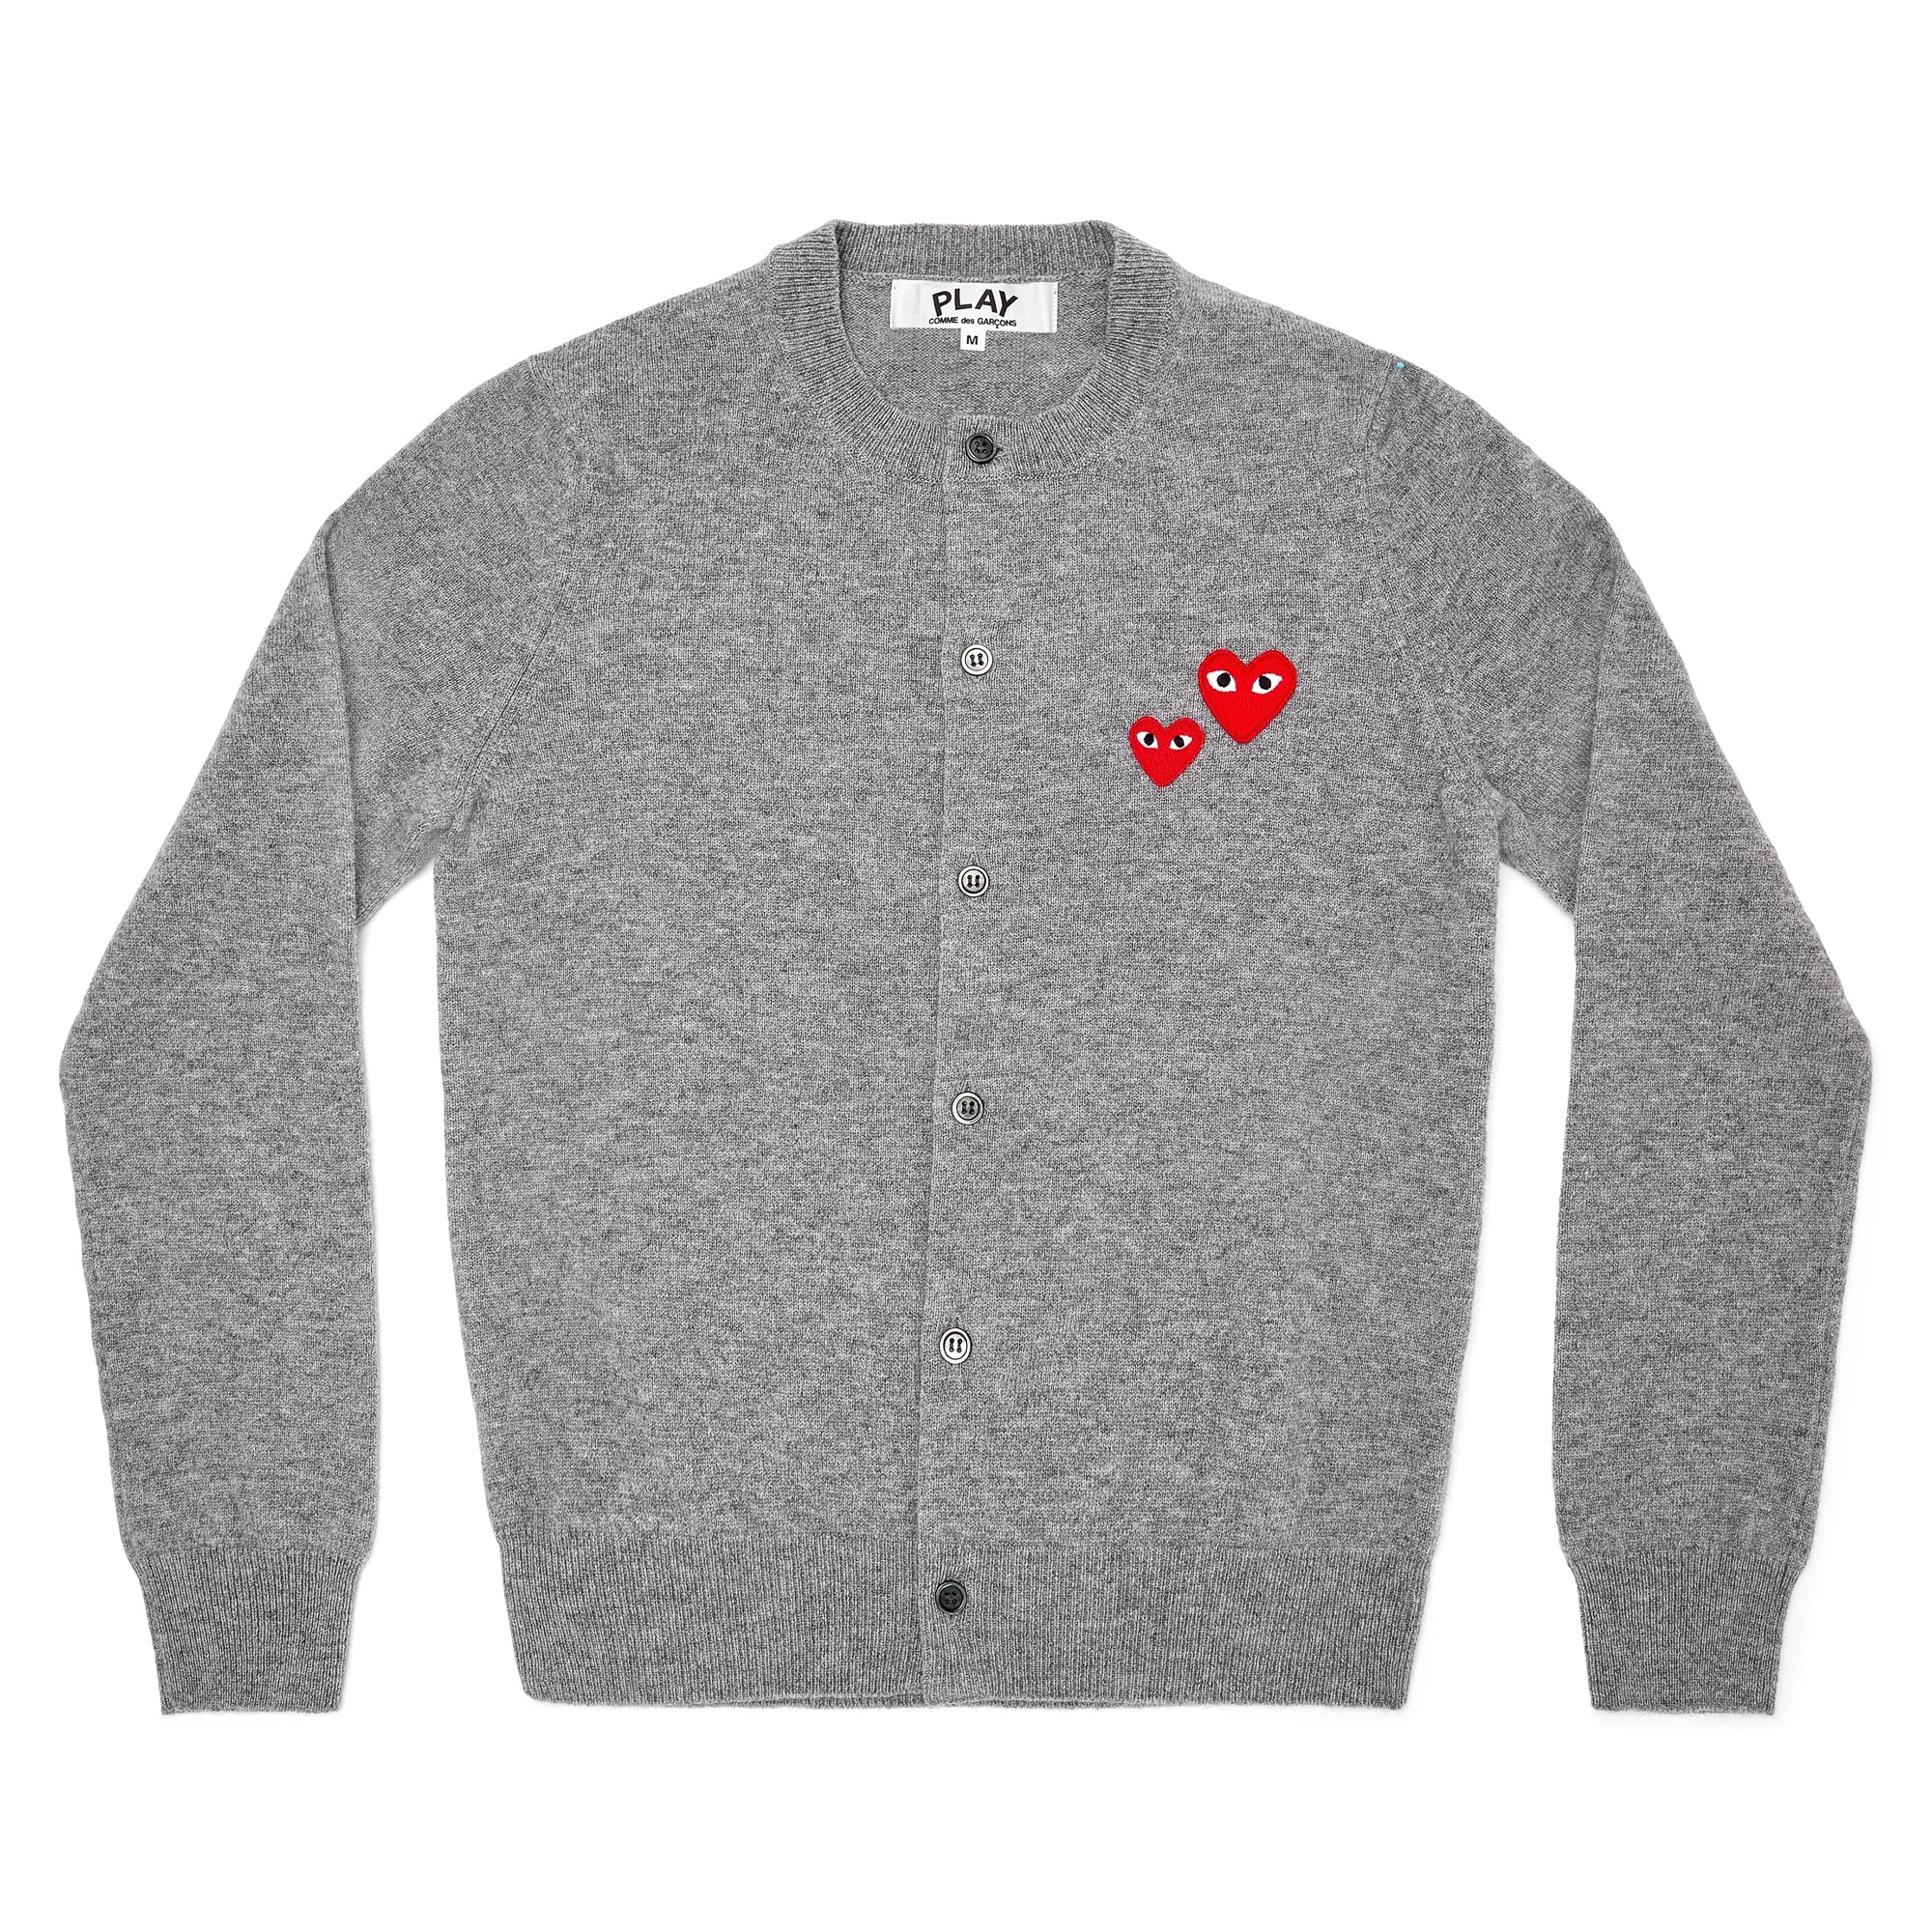 PLAY CDG - LADIE'S DOUBLE HEART CARDIGAN - (GREY) view 1